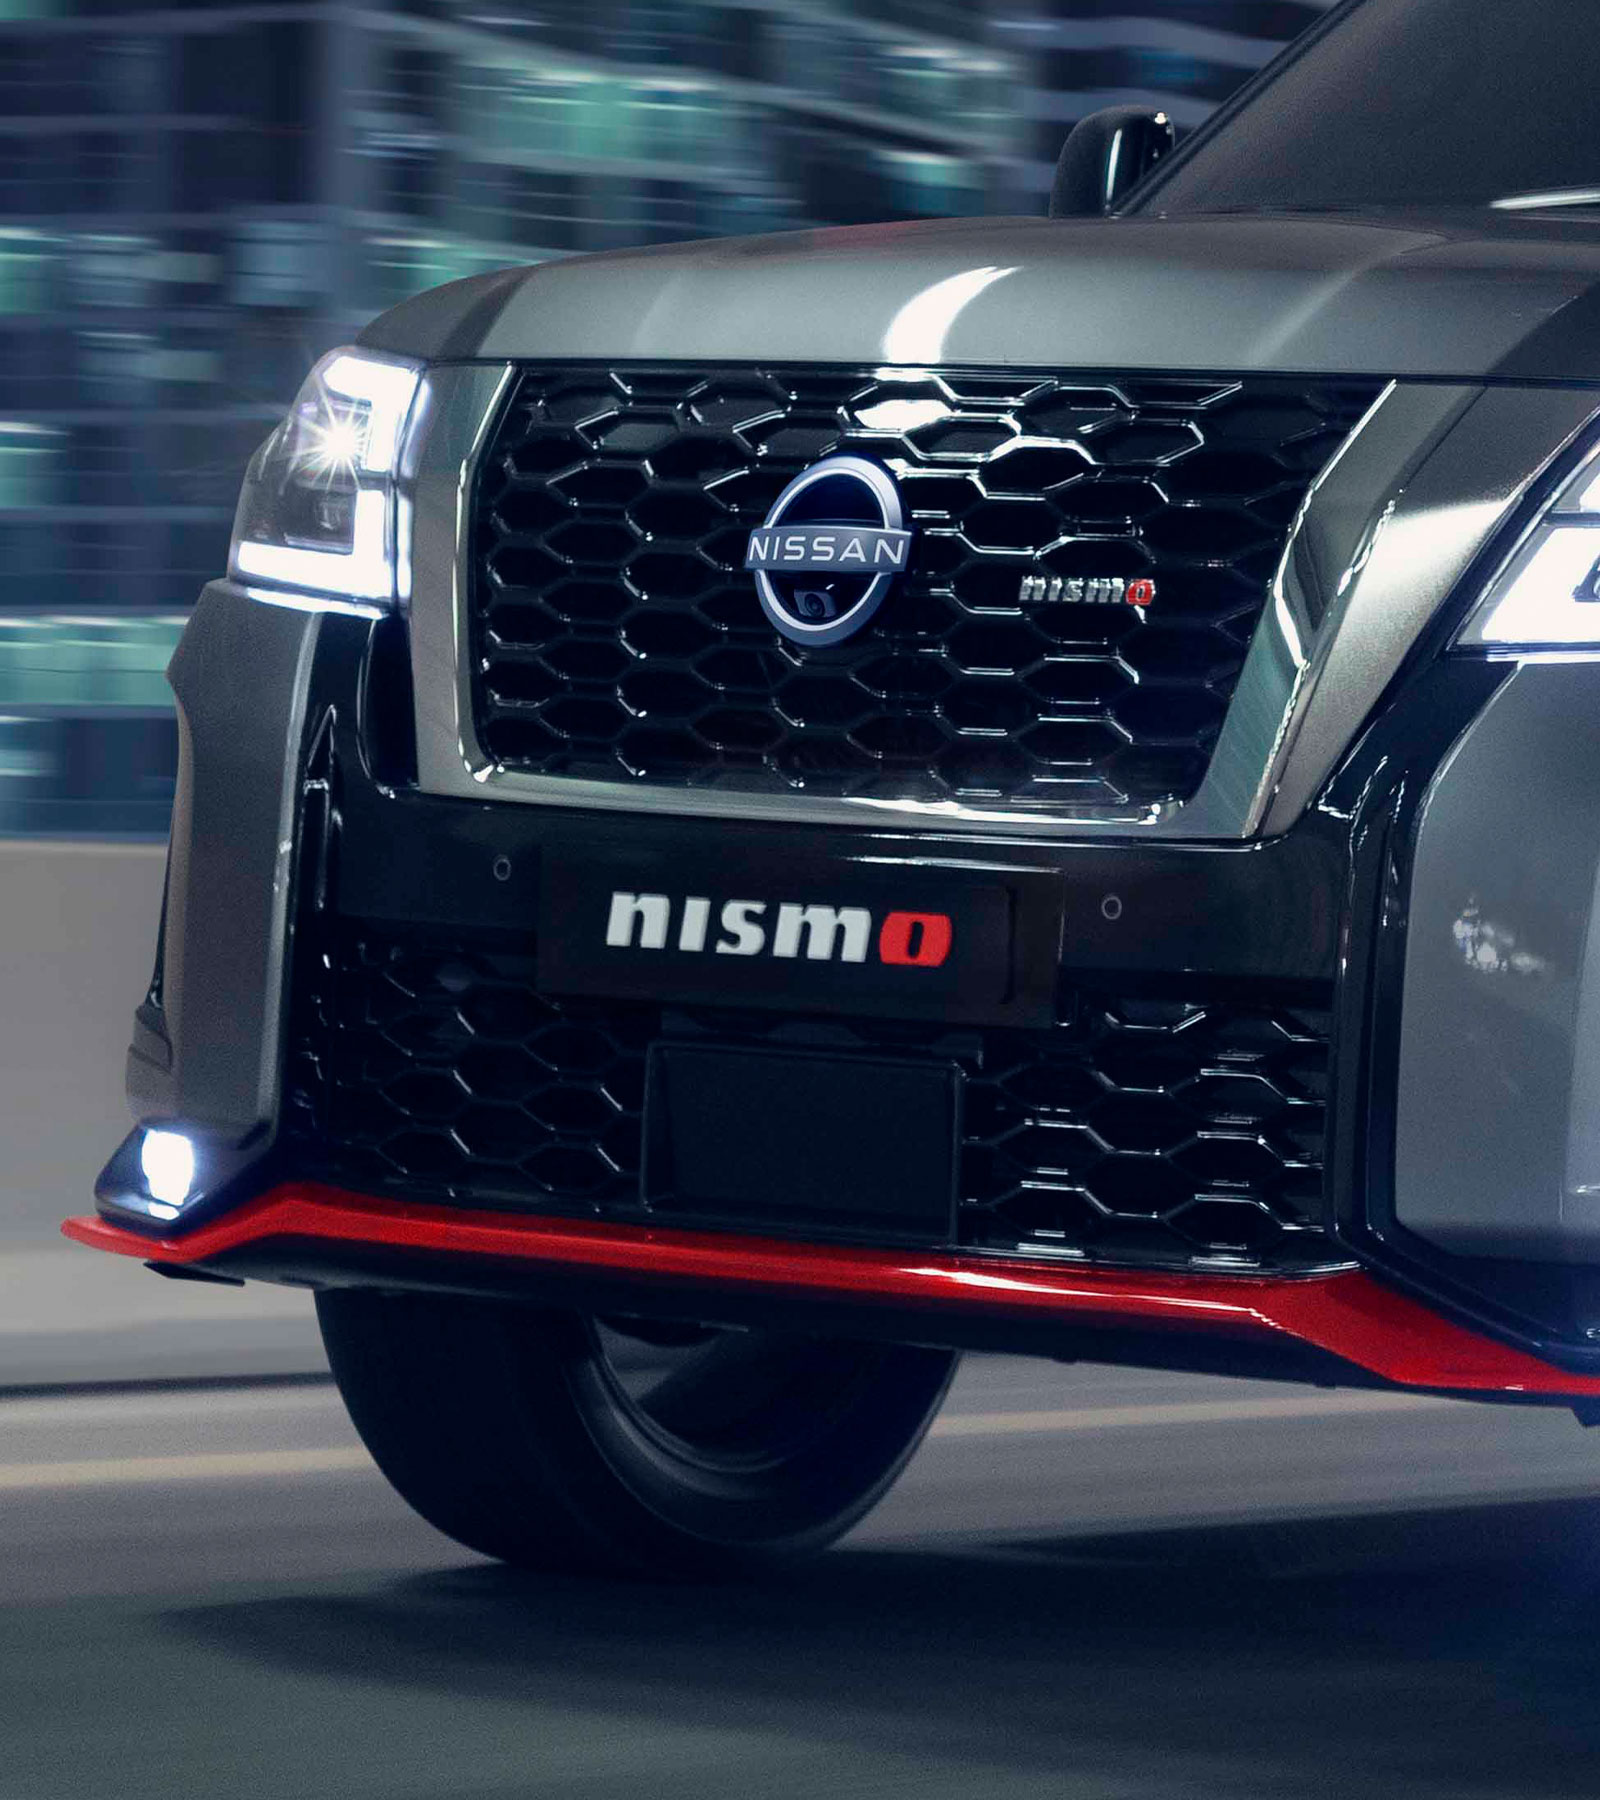 Nissan PATROL NISMO front shot on the highway road